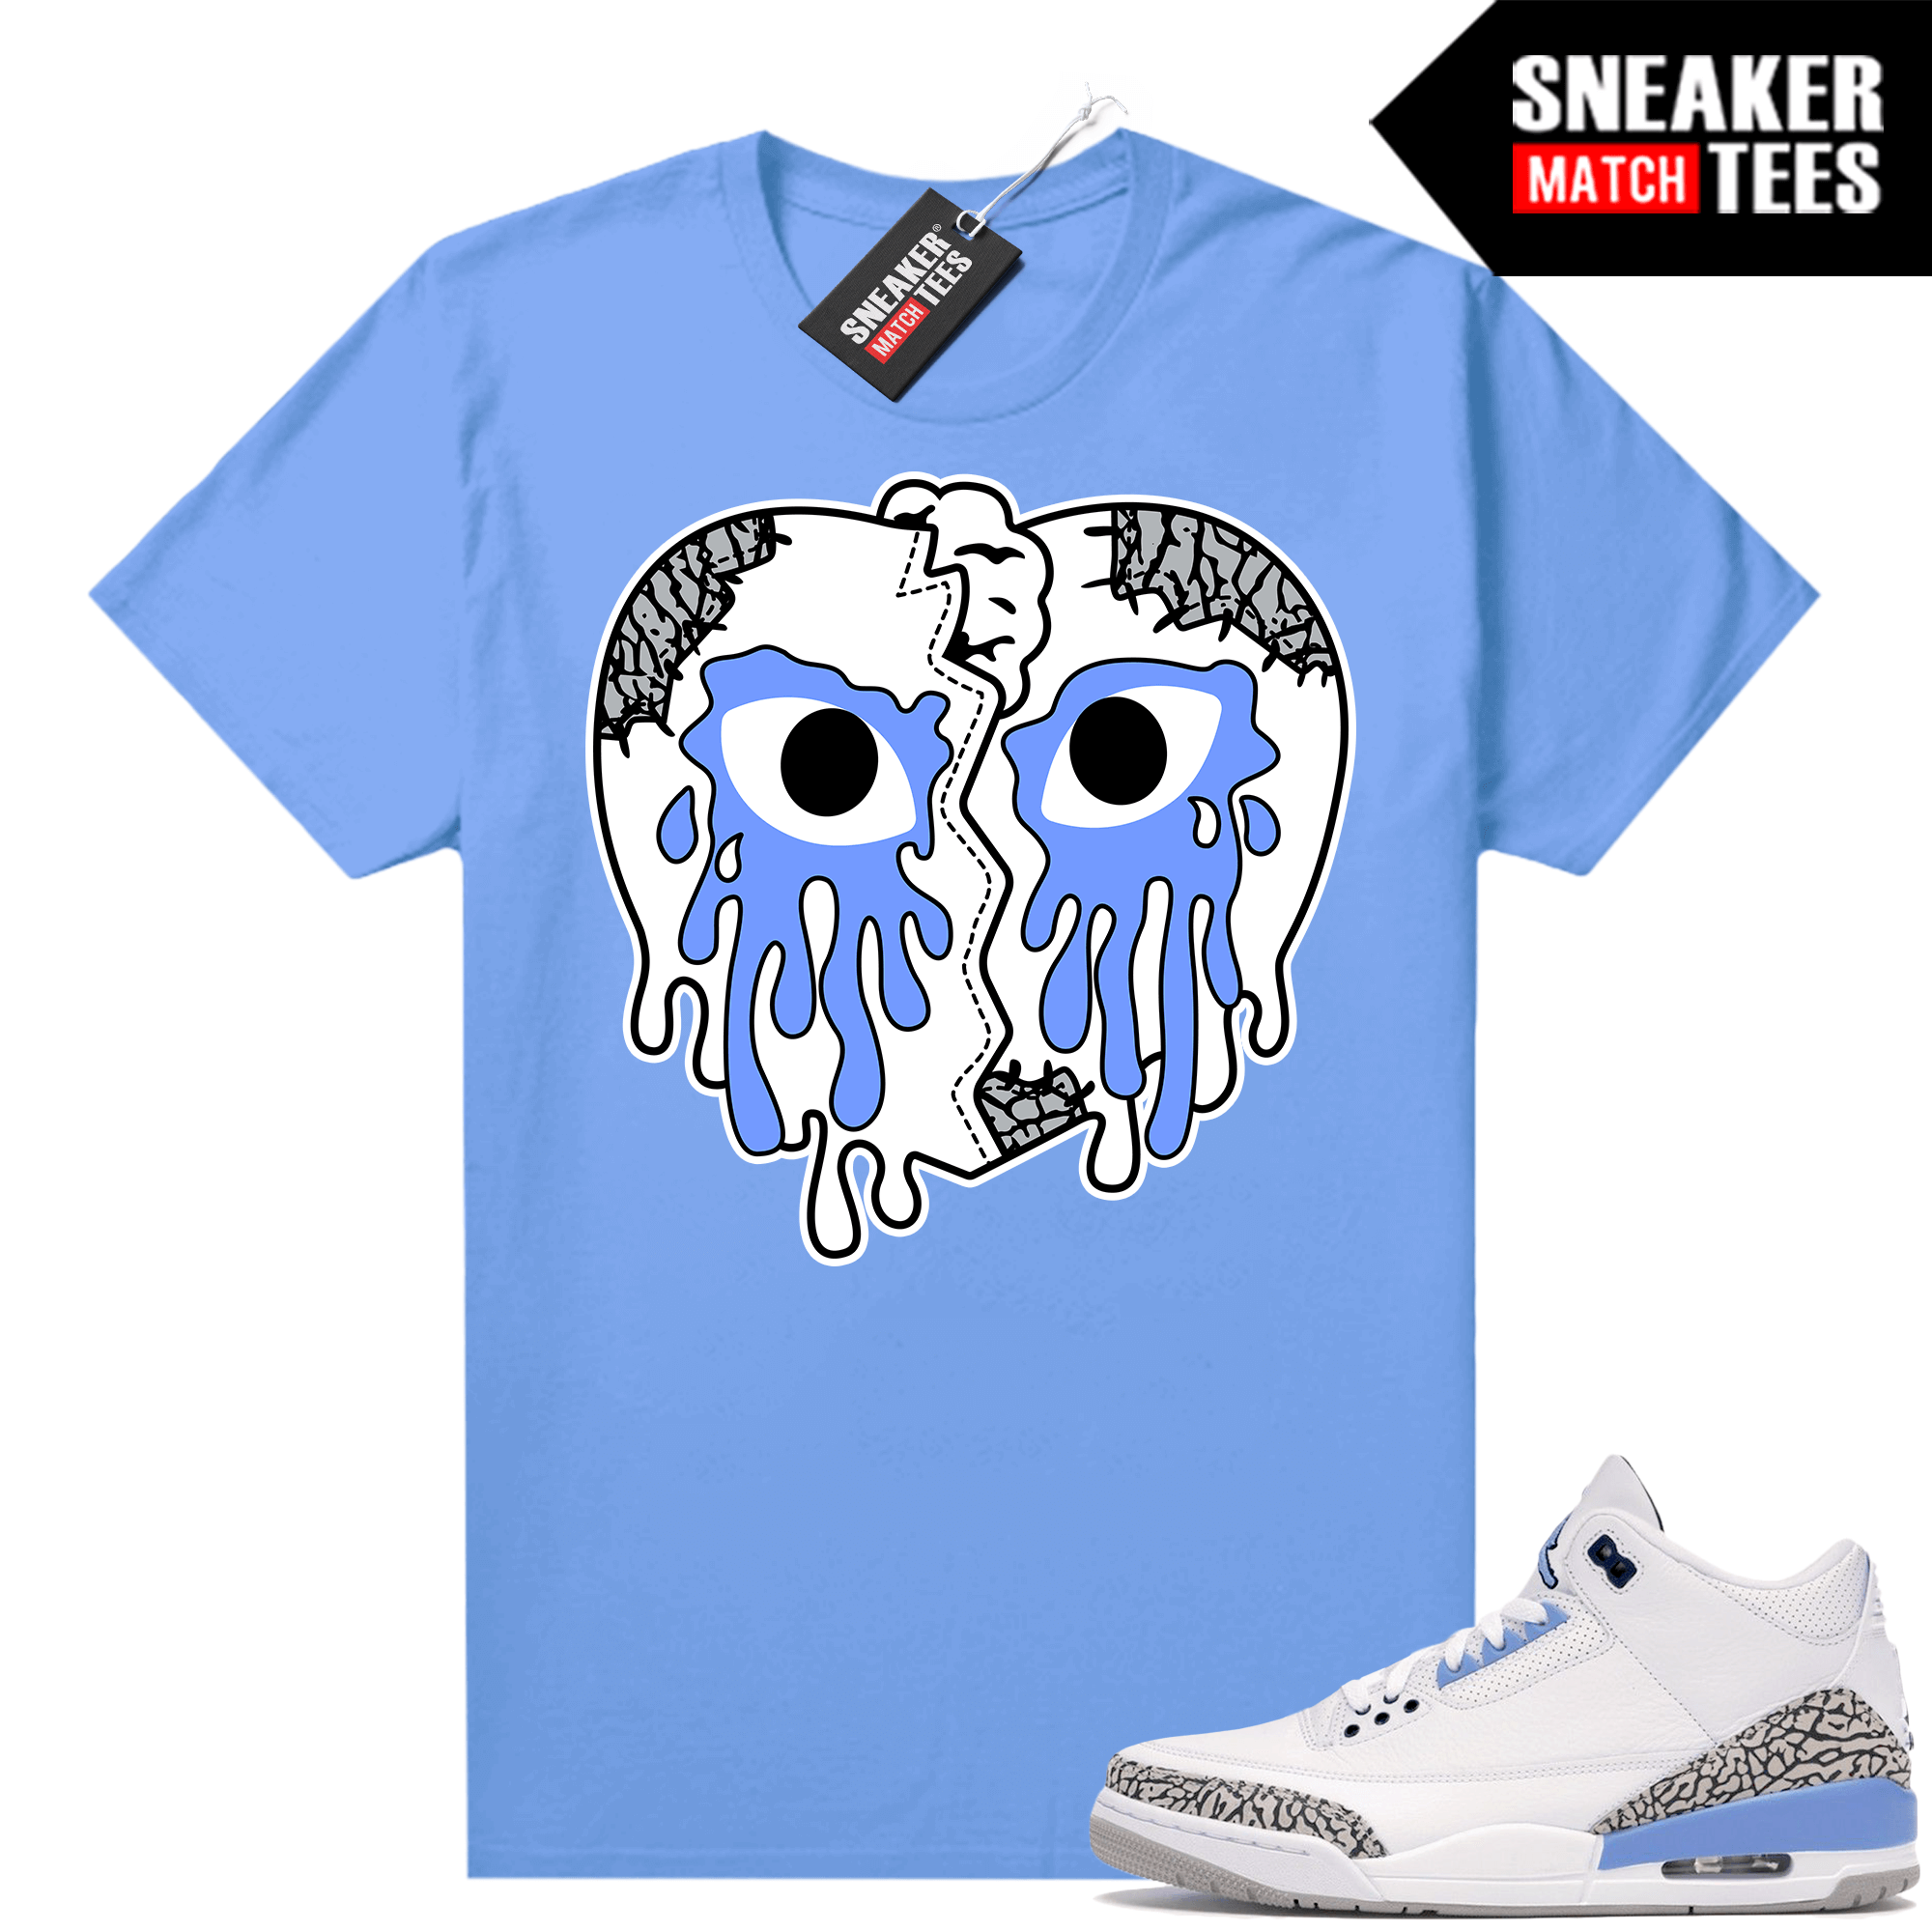 UNC 3s Shirts to match Ariss-eu Sneakers Sale Online University Blue Crying Heart